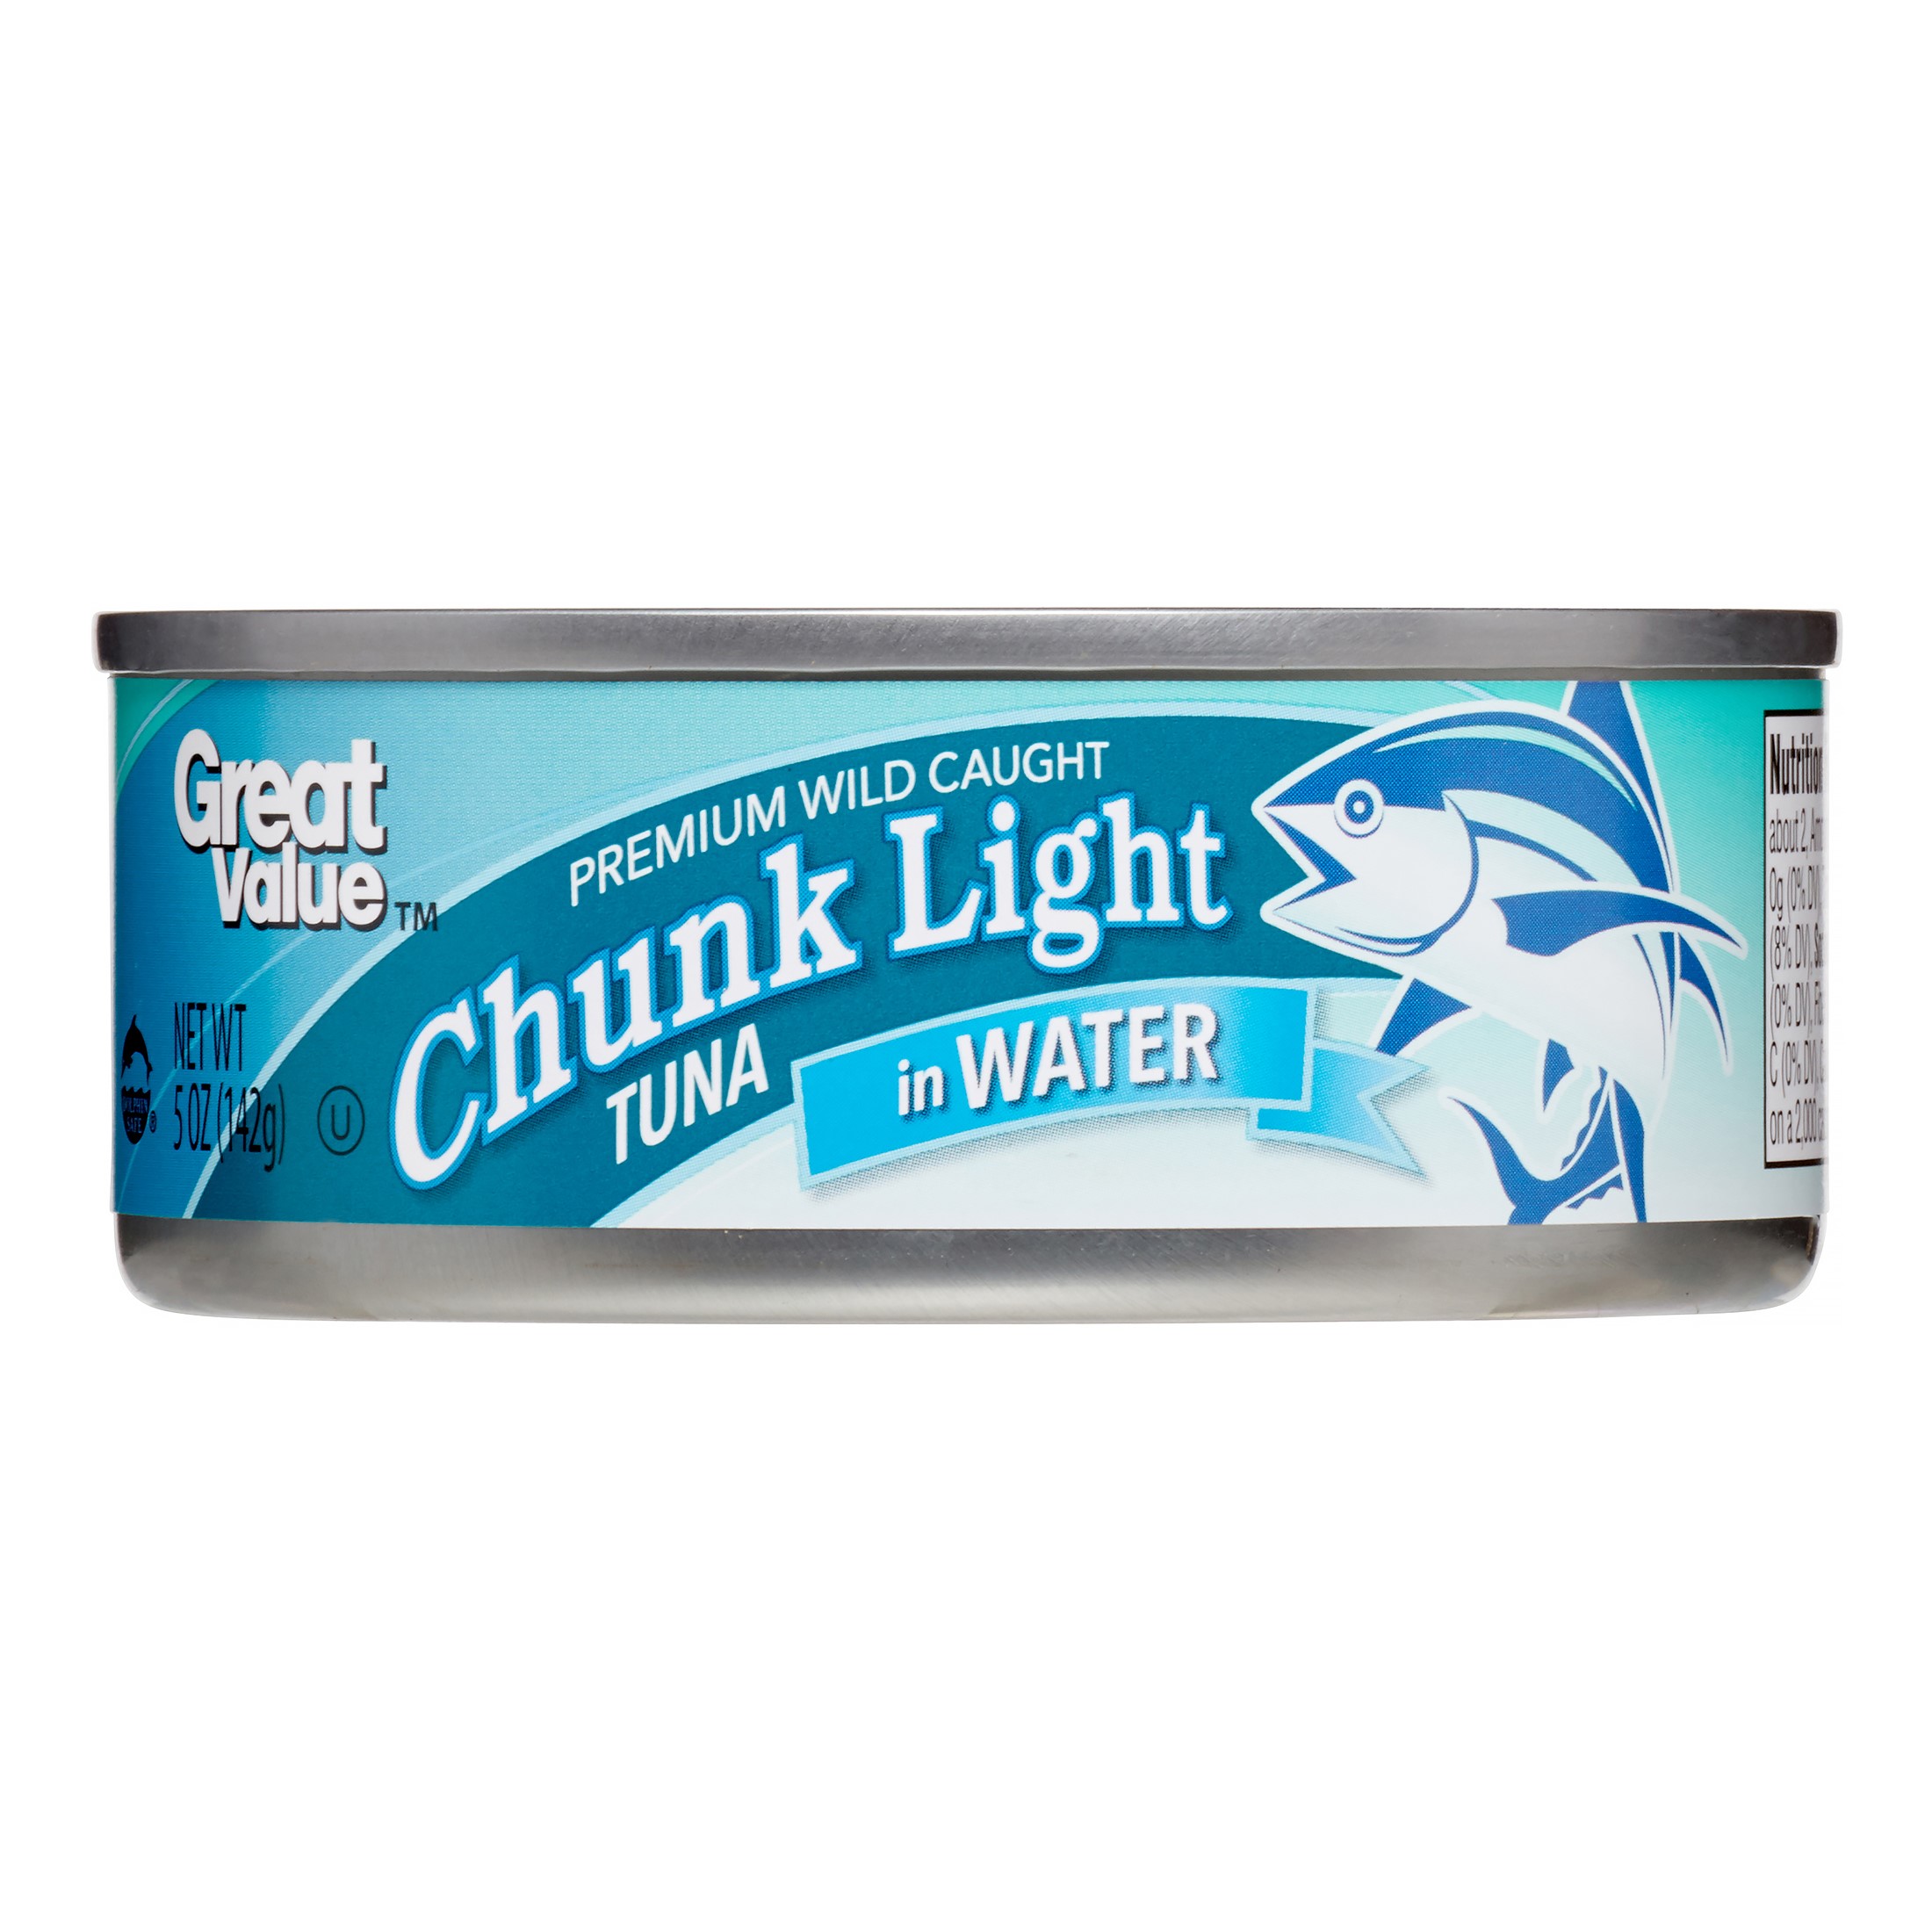 (3 Pack) Great Value Chunk Light Tuna in Water, 5 Oz Image